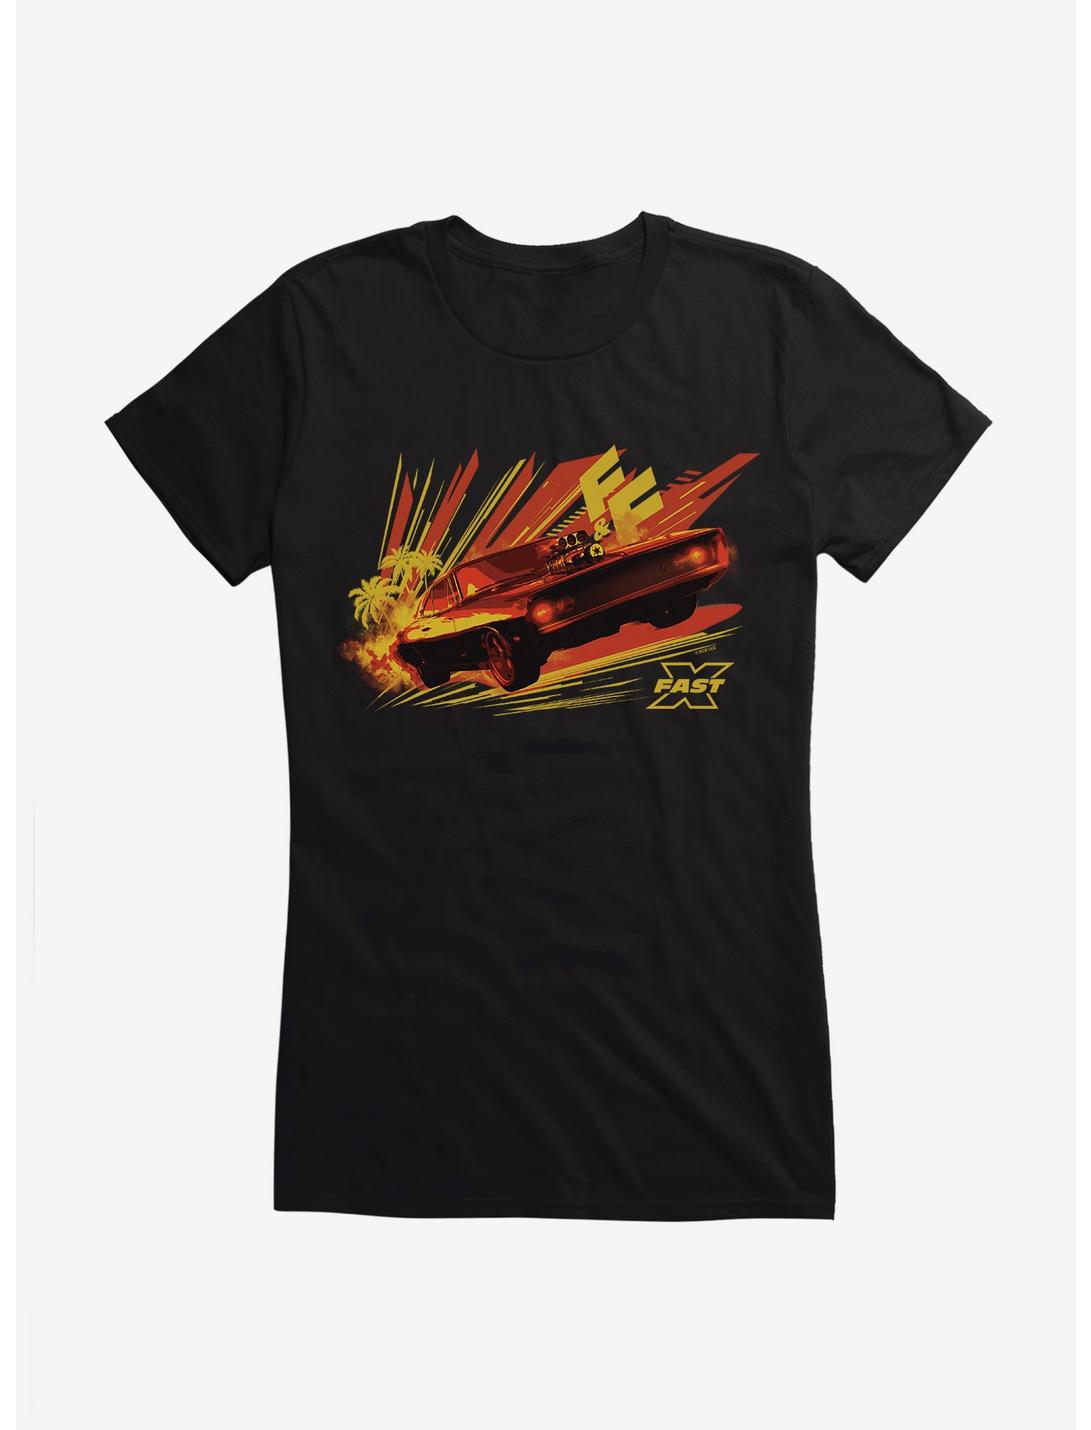 Fast X Dom Toretto's Charger Girls T-Shirt, , hi-res